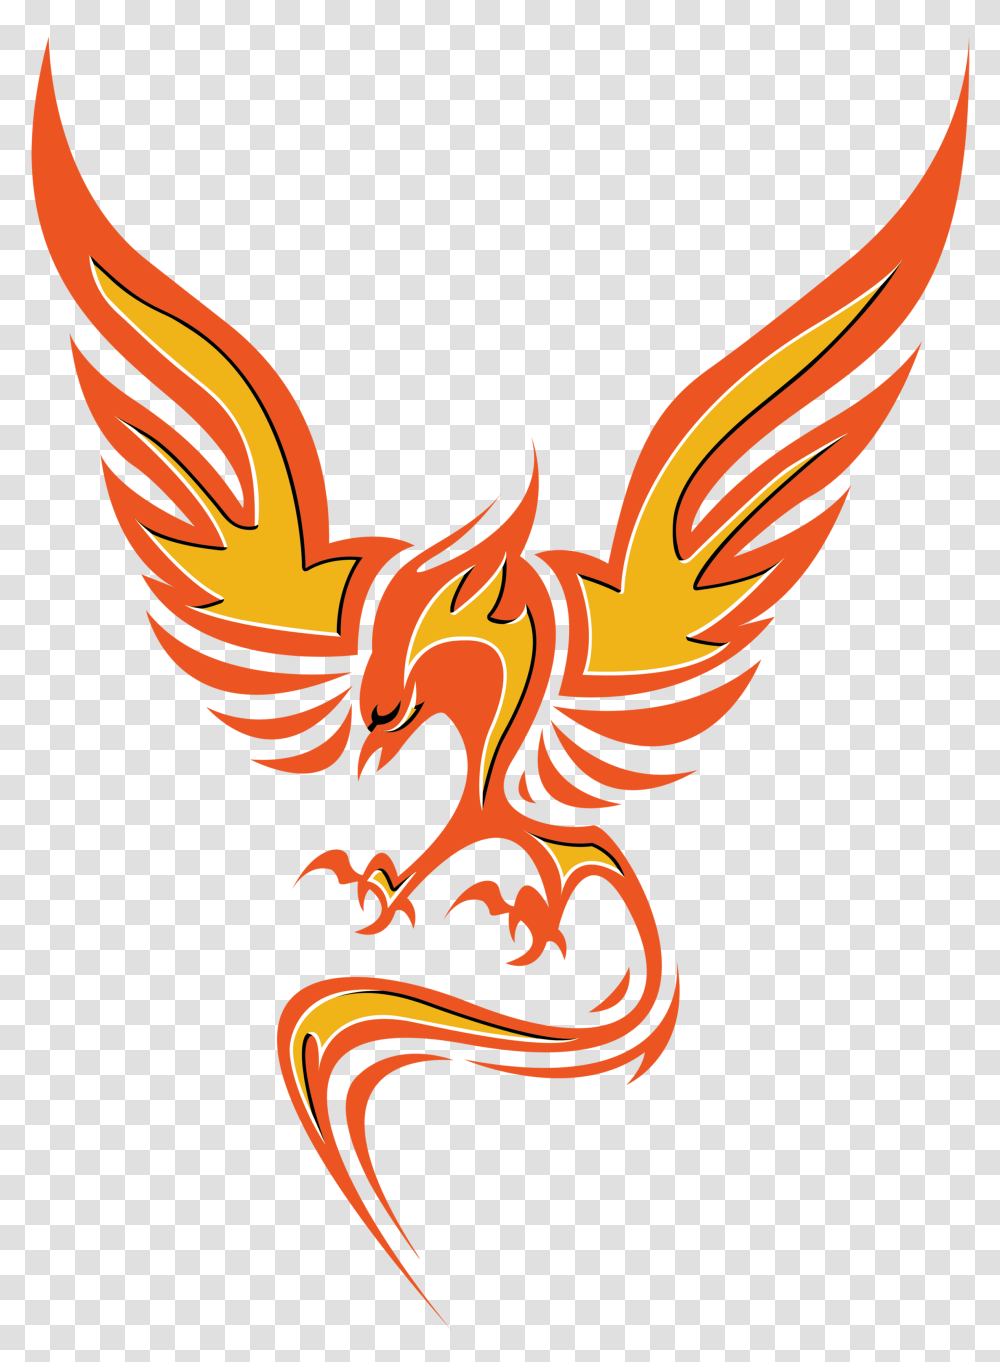 Ghost Recon Breakpoint Live Event - Out Of The Ashes Fire Phoenix Logo, Dragon, Bird, Animal, Emblem Transparent Png